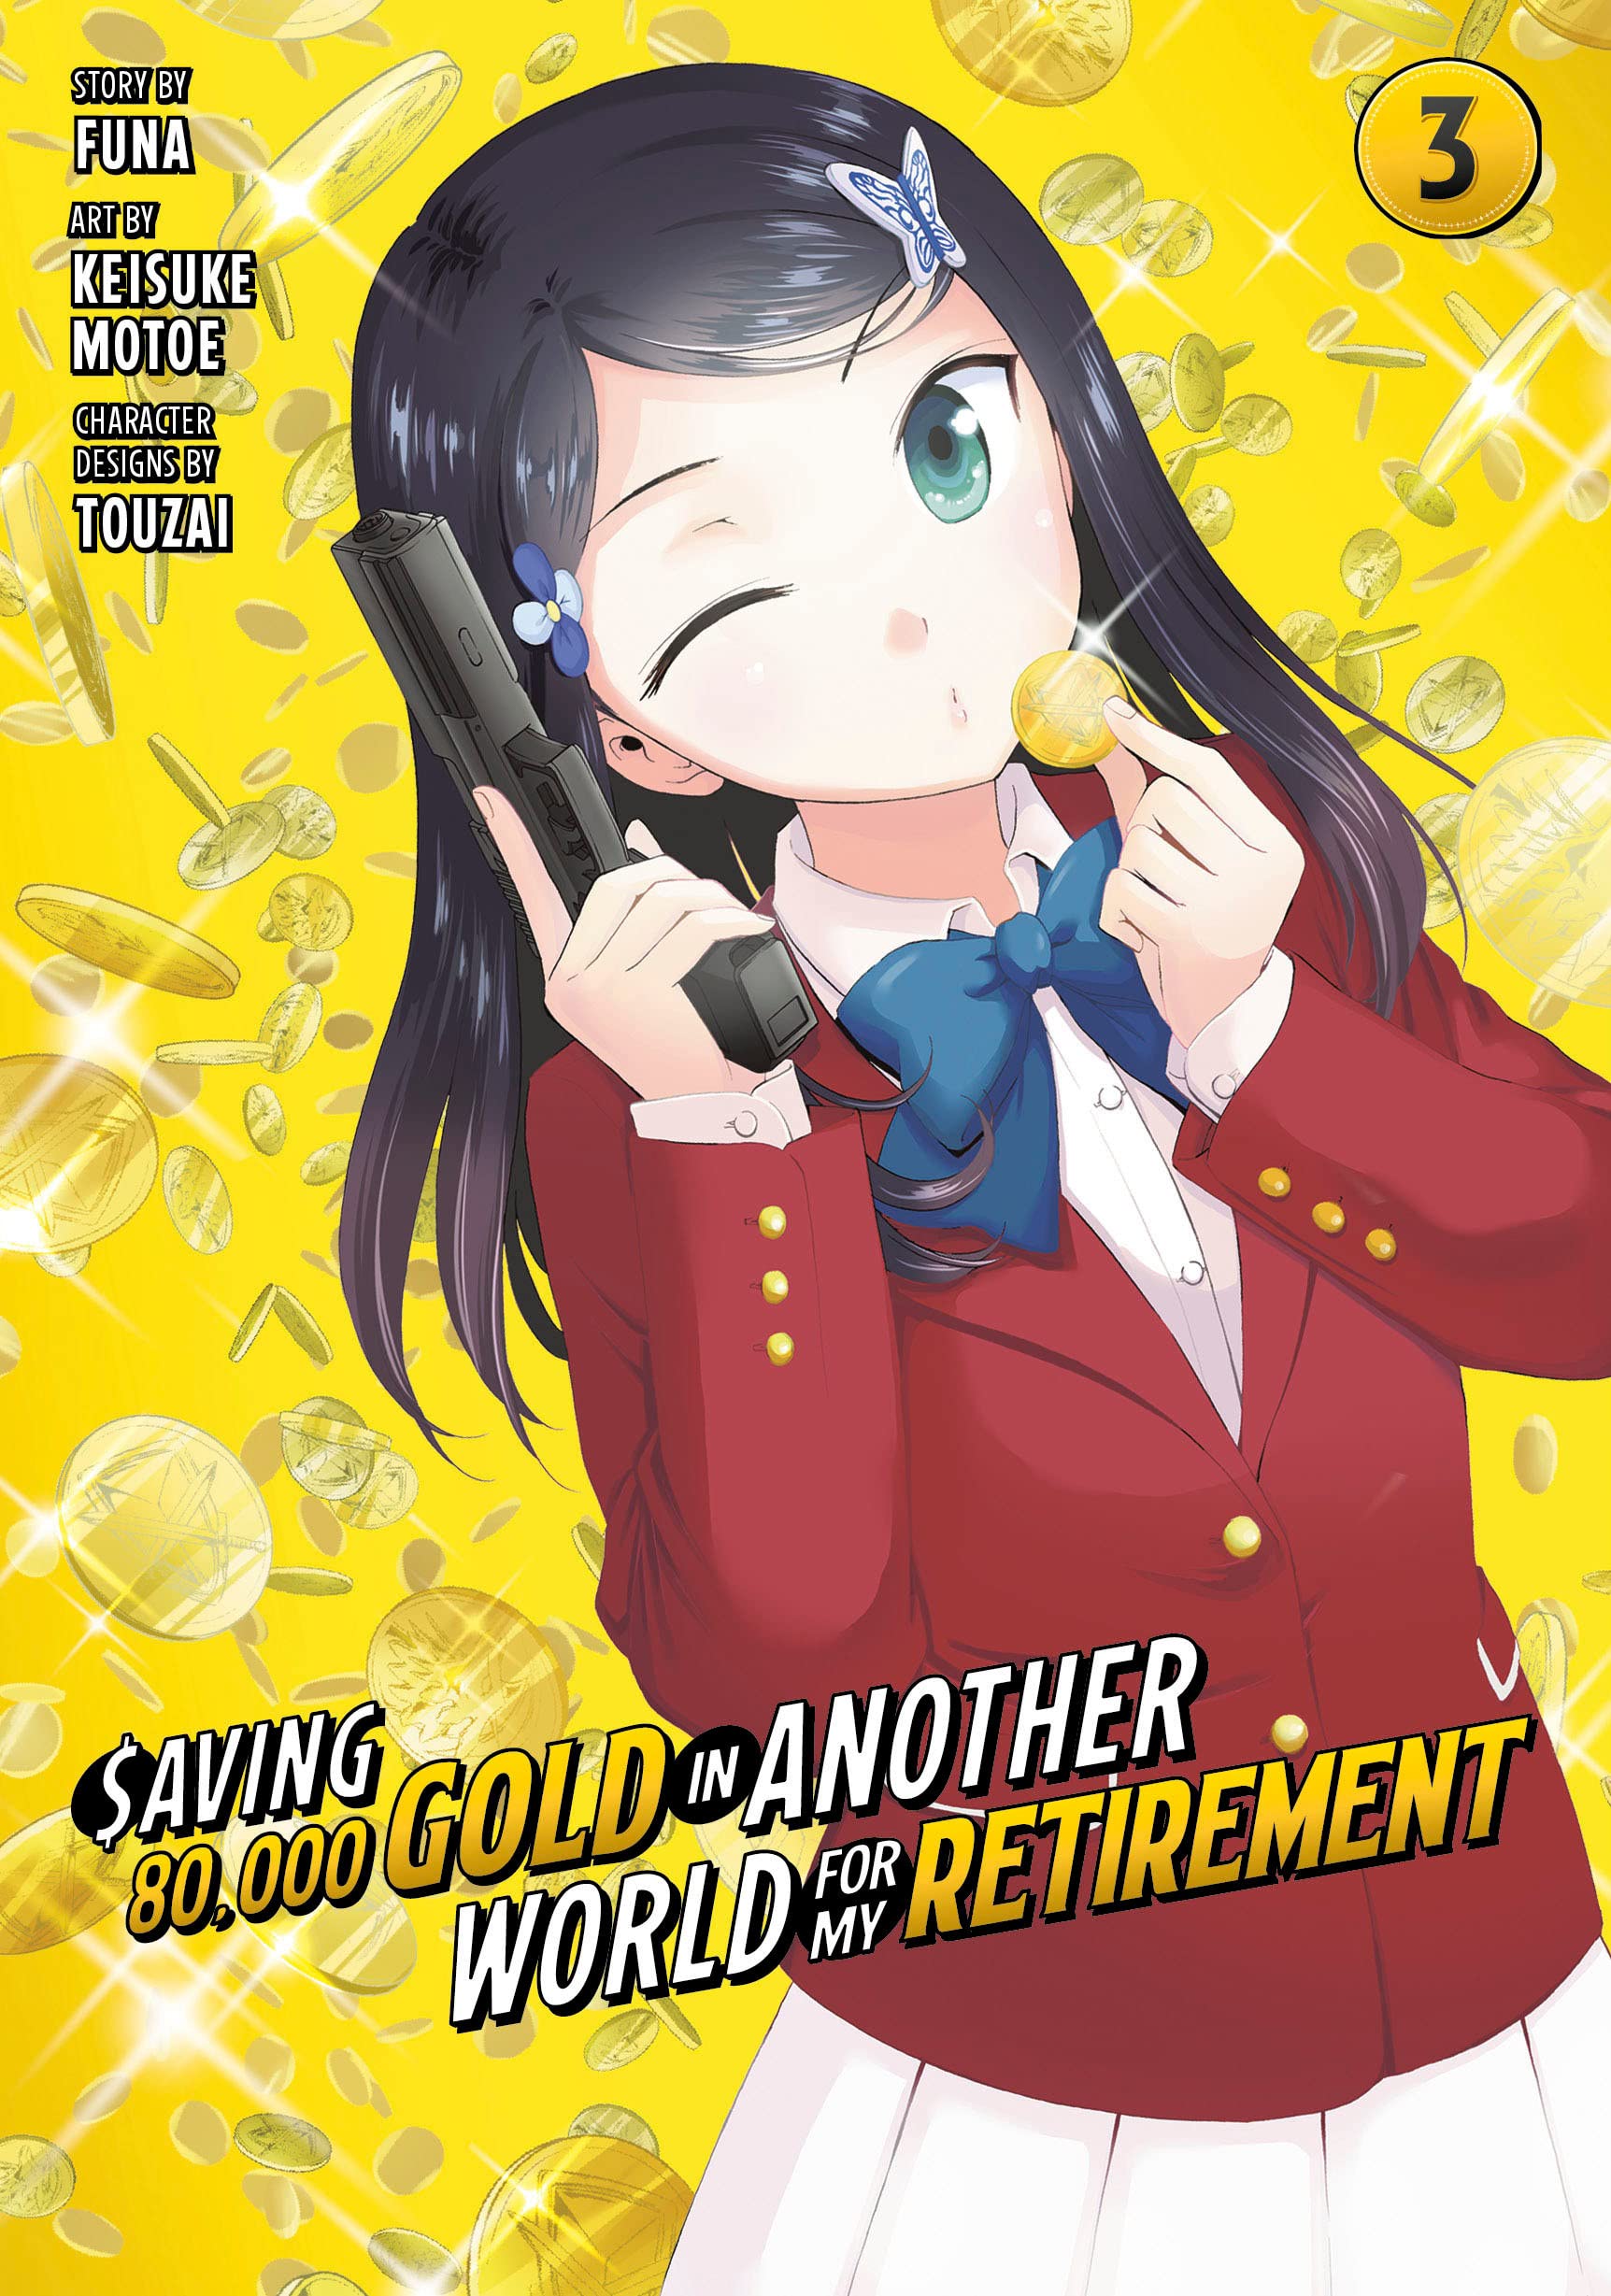 Saving 80,000 Gold in Another World for My Retirement (Manga) Vol. 03